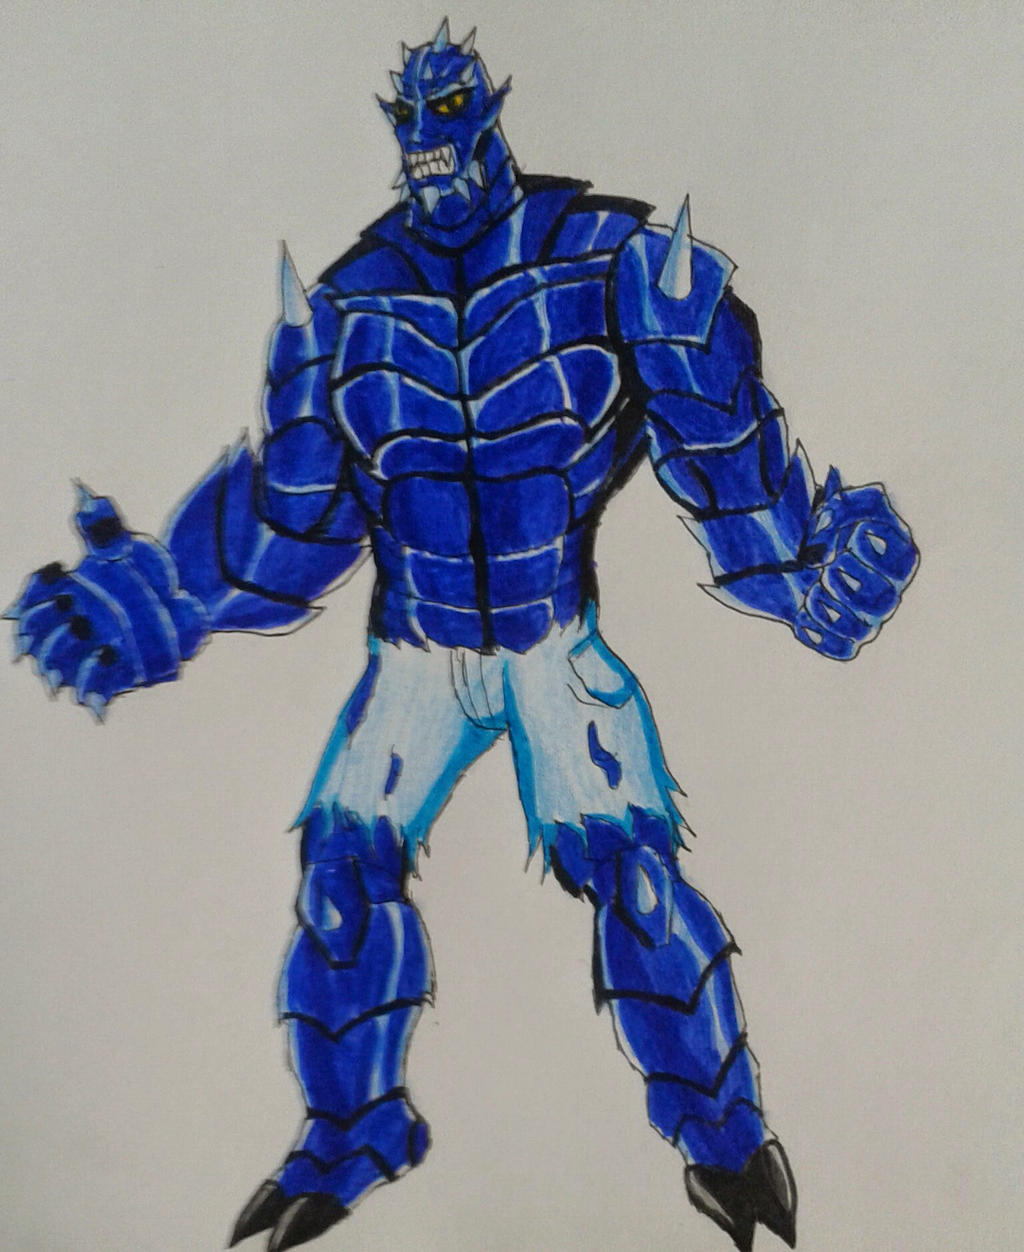 ABomb from Marvel redesign by Kamran10000 on DeviantArt